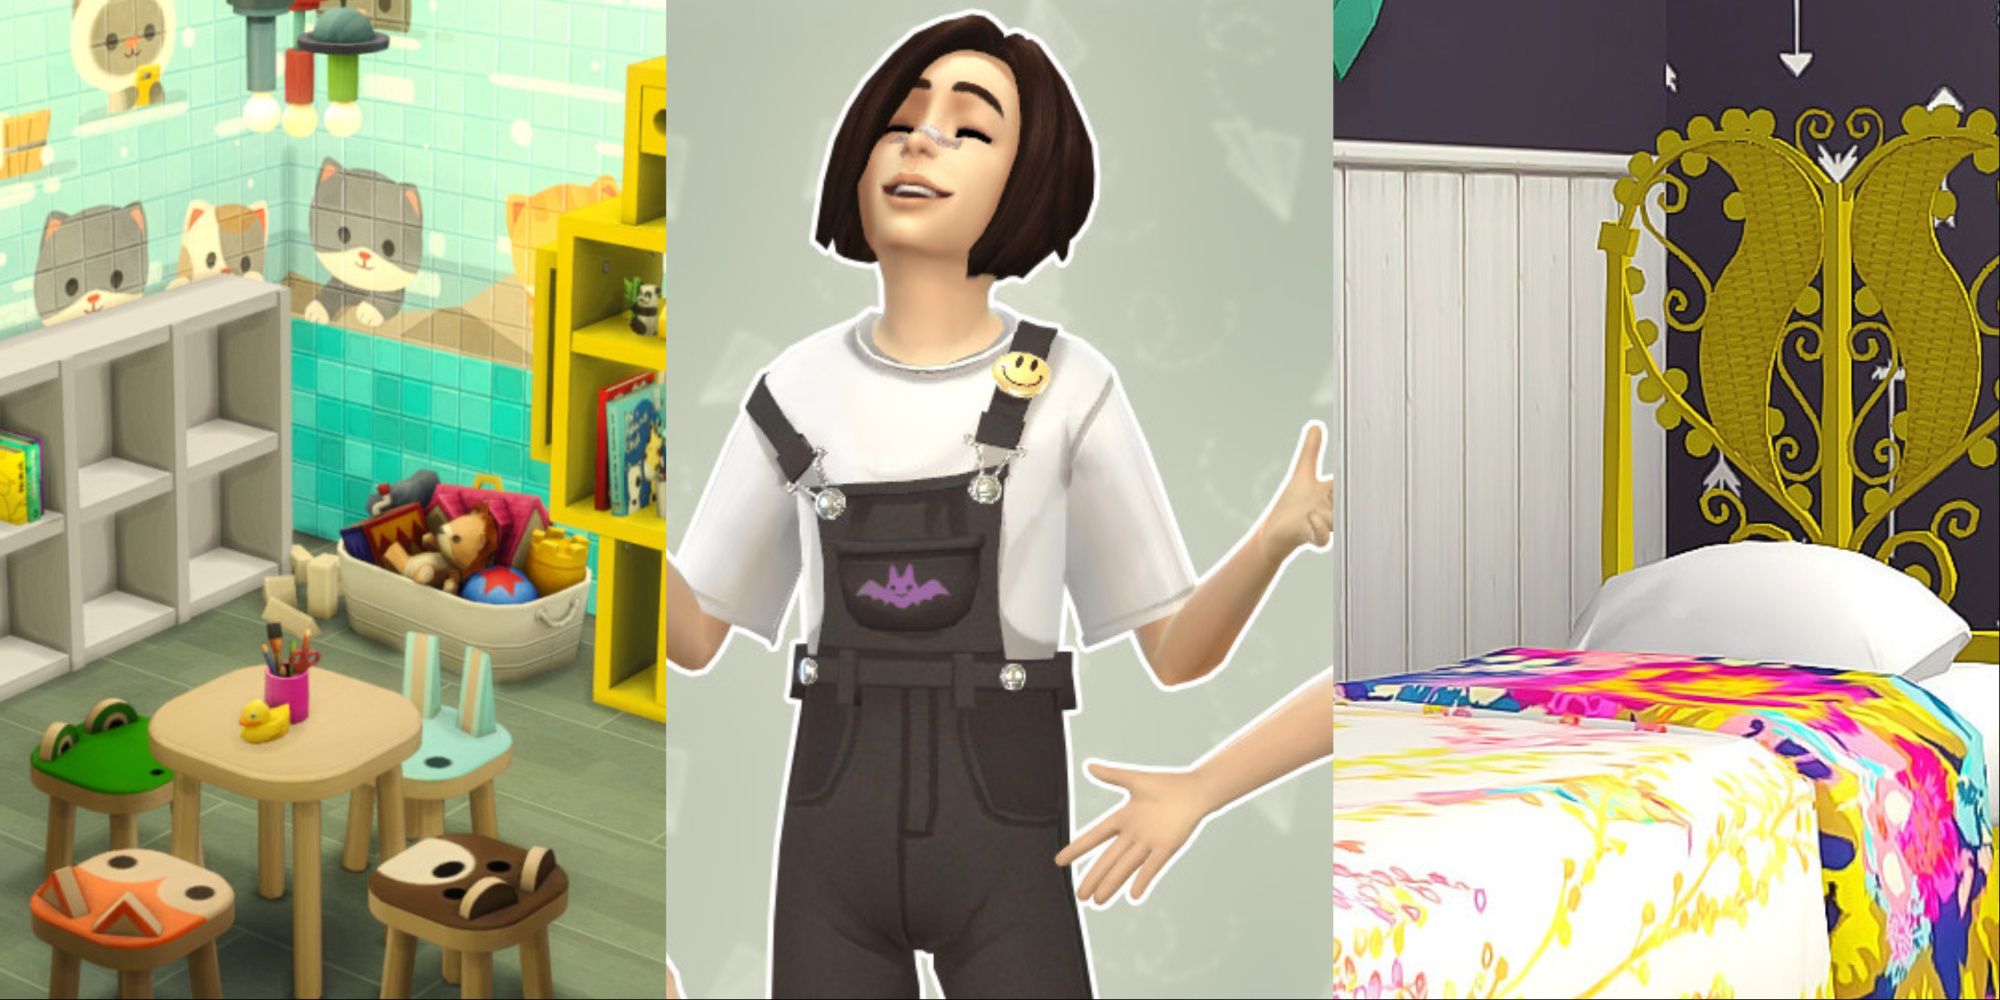 From left to right: kids' room furniture set, overalls for children, and a modern decor themed kids' room set